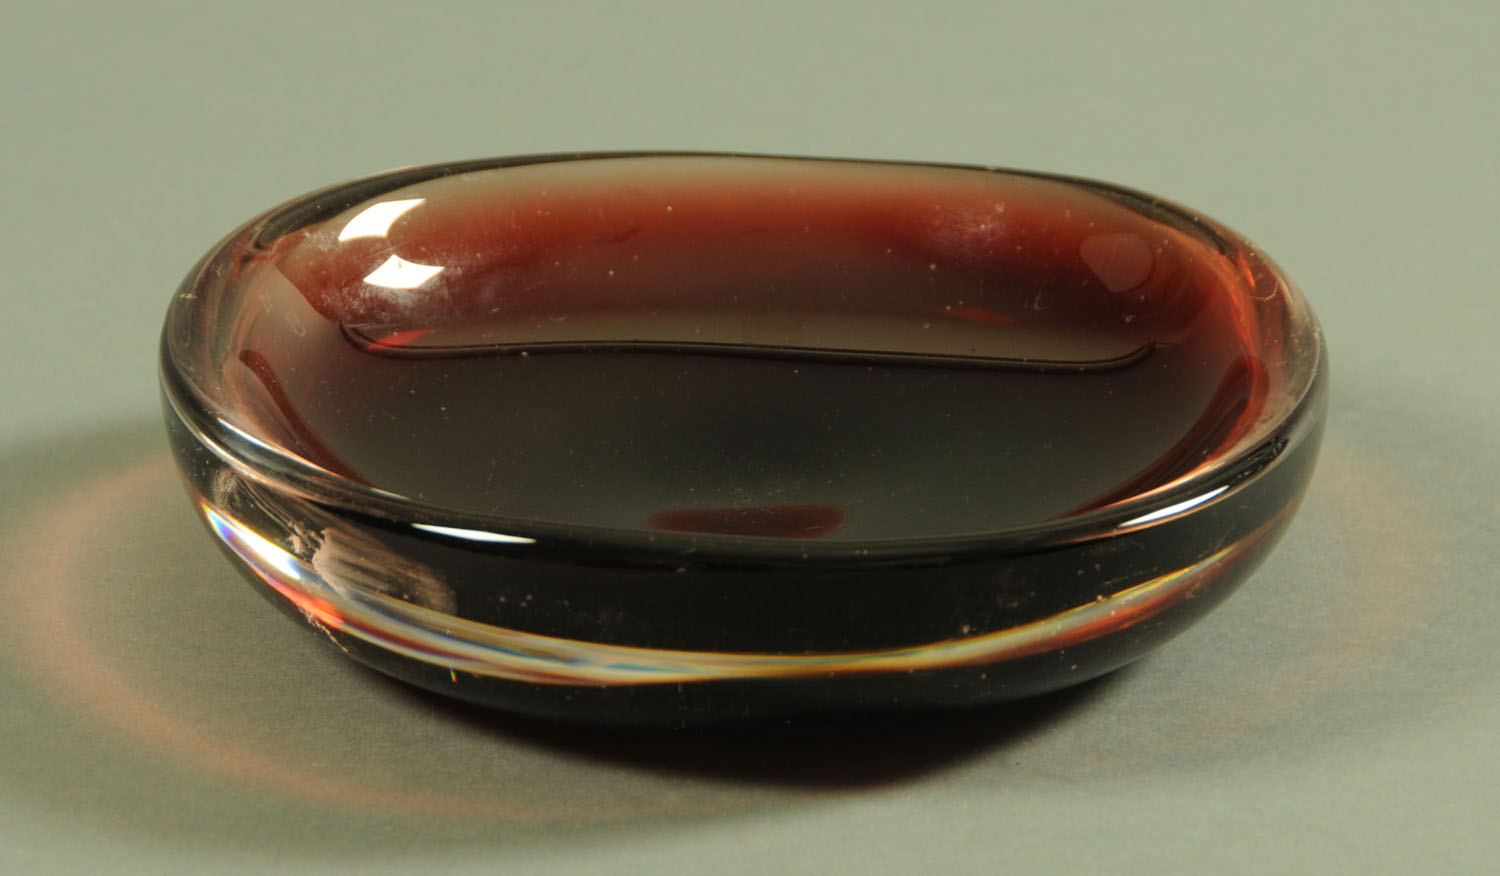 Sven Palmquist for Orrefors, a red "Selena" dish, mid 20th century, engraved marks "Orrefors,